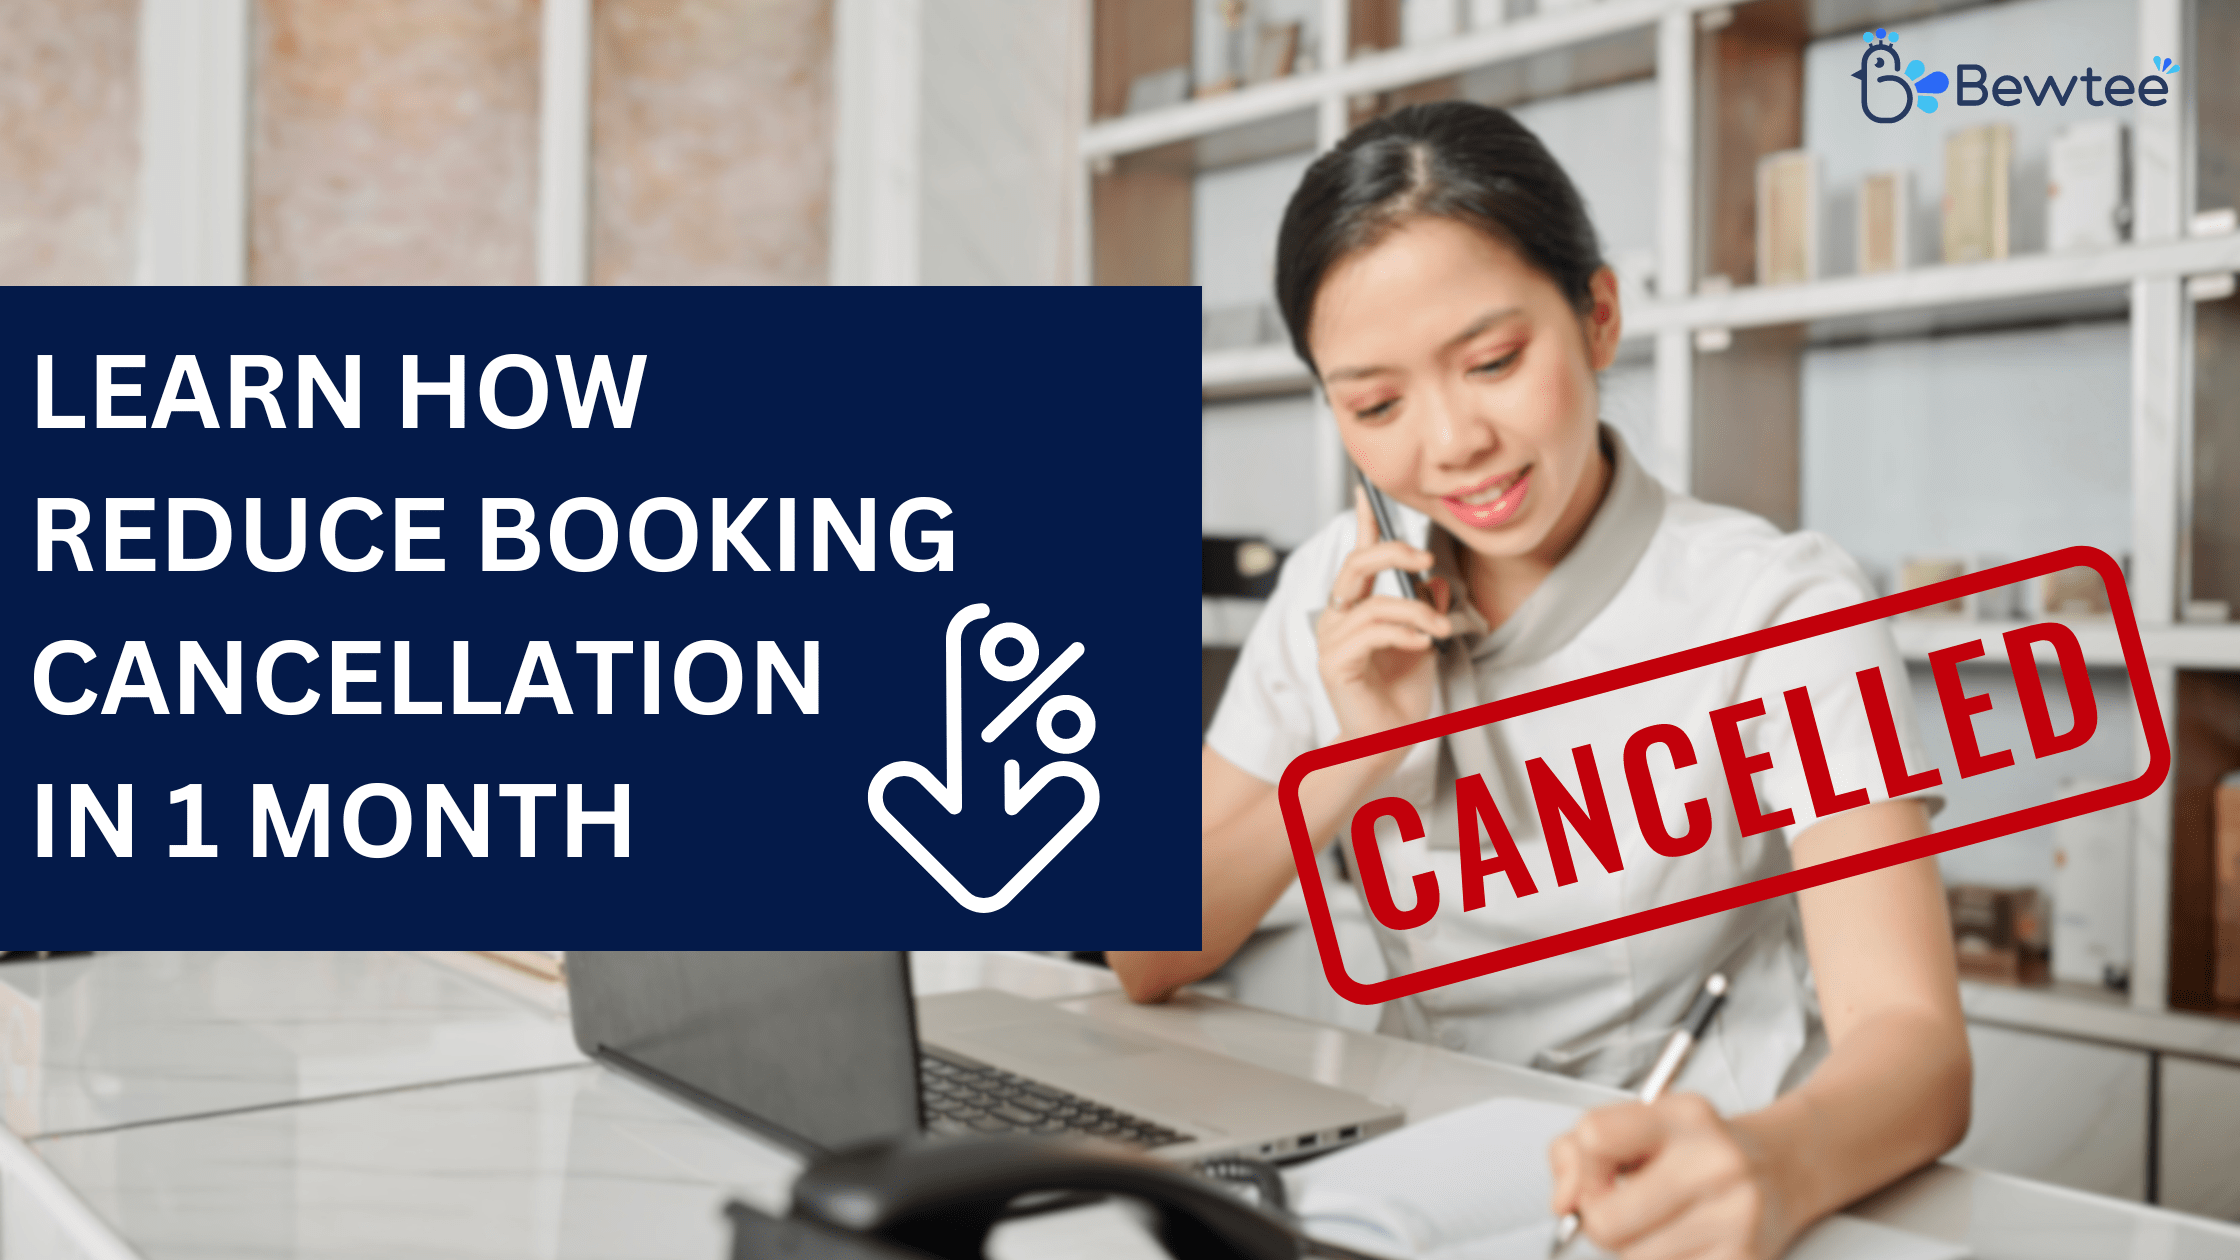 Do Not Fear! Learn how to Reduce Booking Cancellation in 1 month!